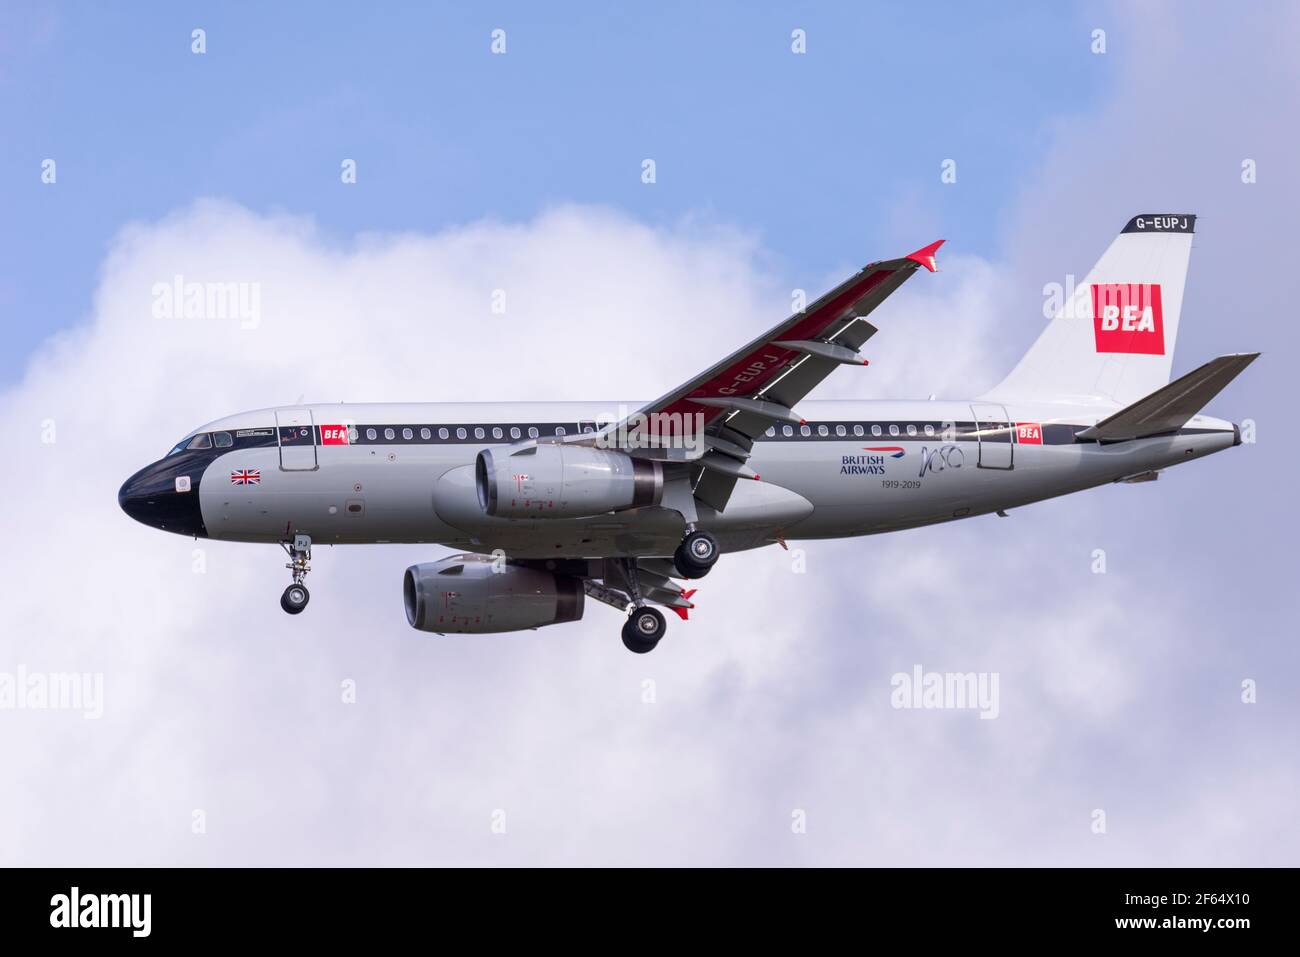 BEA retro British Airways Airbus A319 jet airliner plane G-EUPJ on finals to land at London Heathrow Airport, UK. BA Centenary special paint scheme Stock Photo